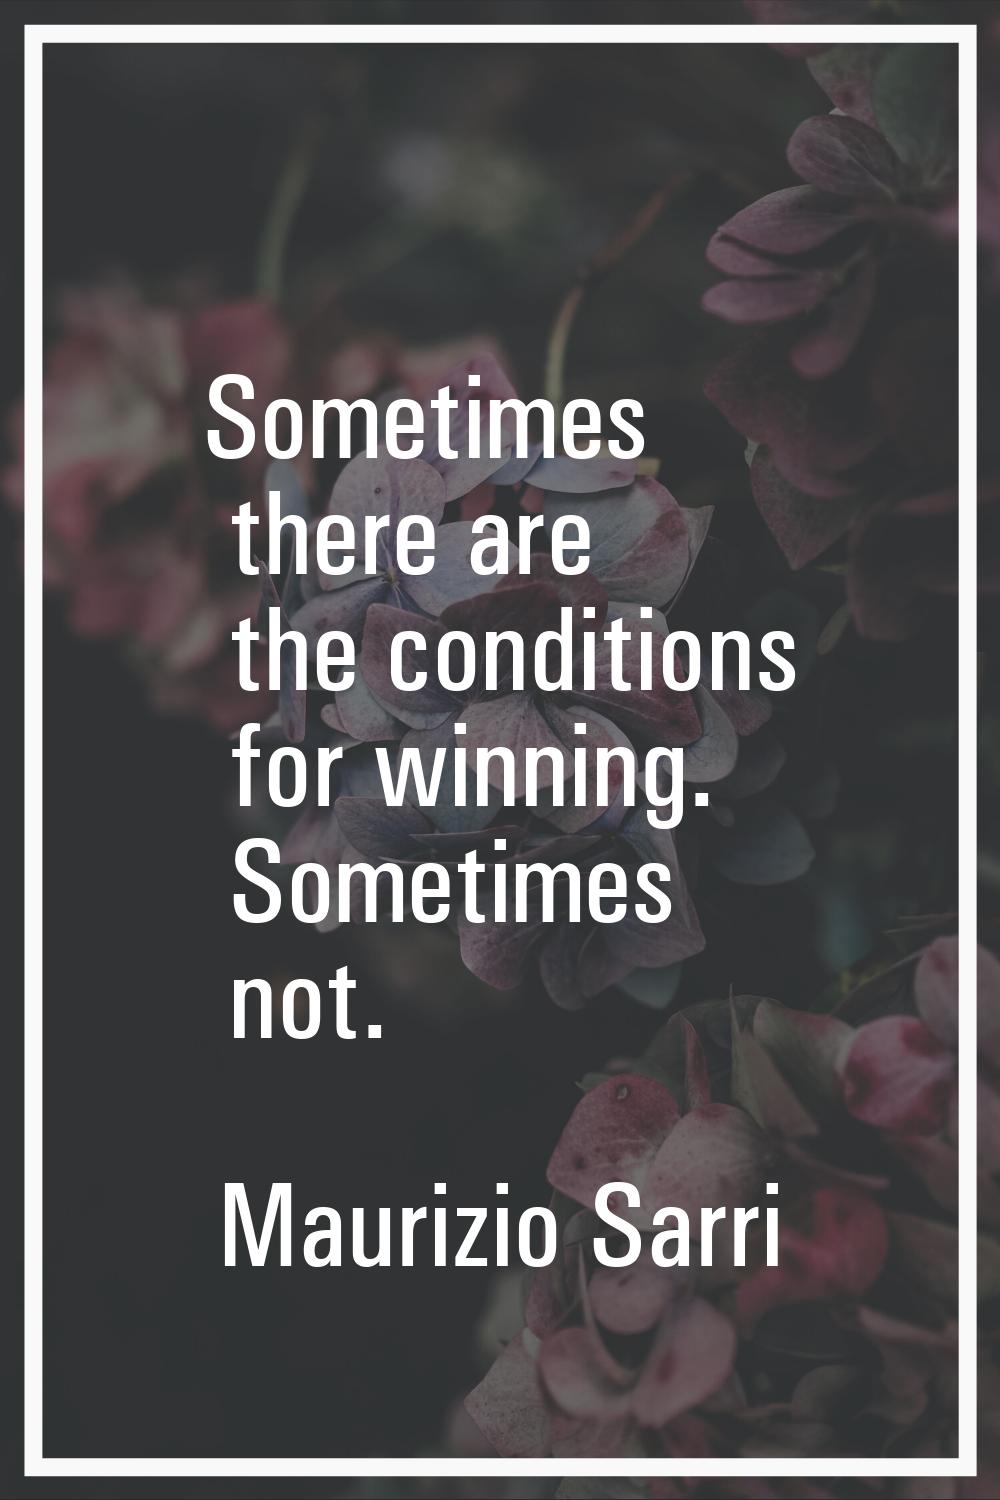 Sometimes there are the conditions for winning. Sometimes not.